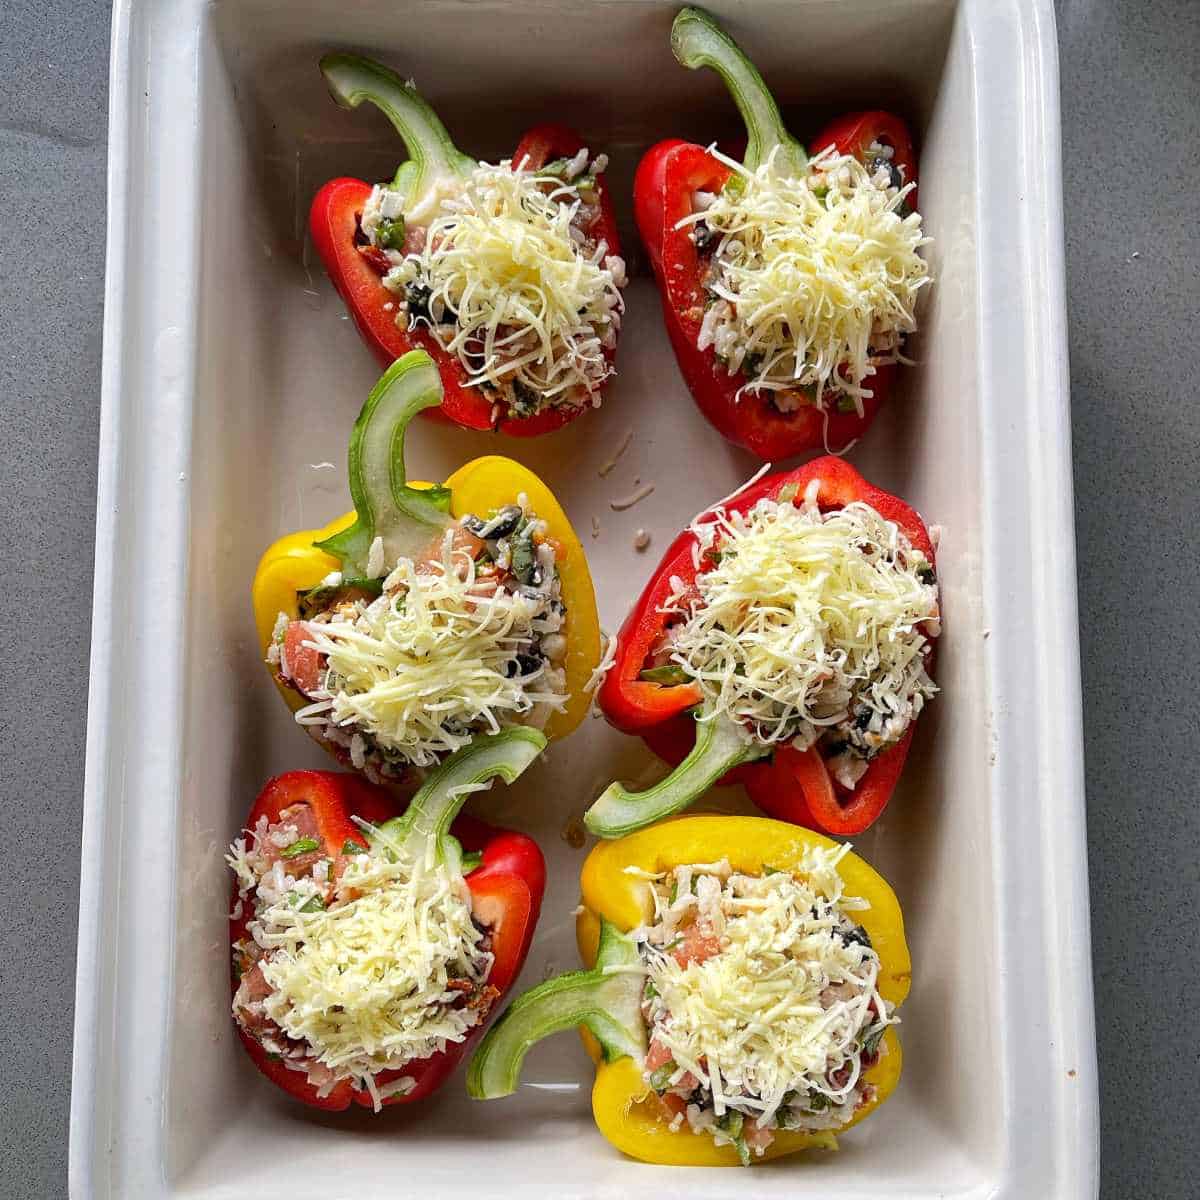 Six stuffed capsicums with grated cheese on top before they have been cooked